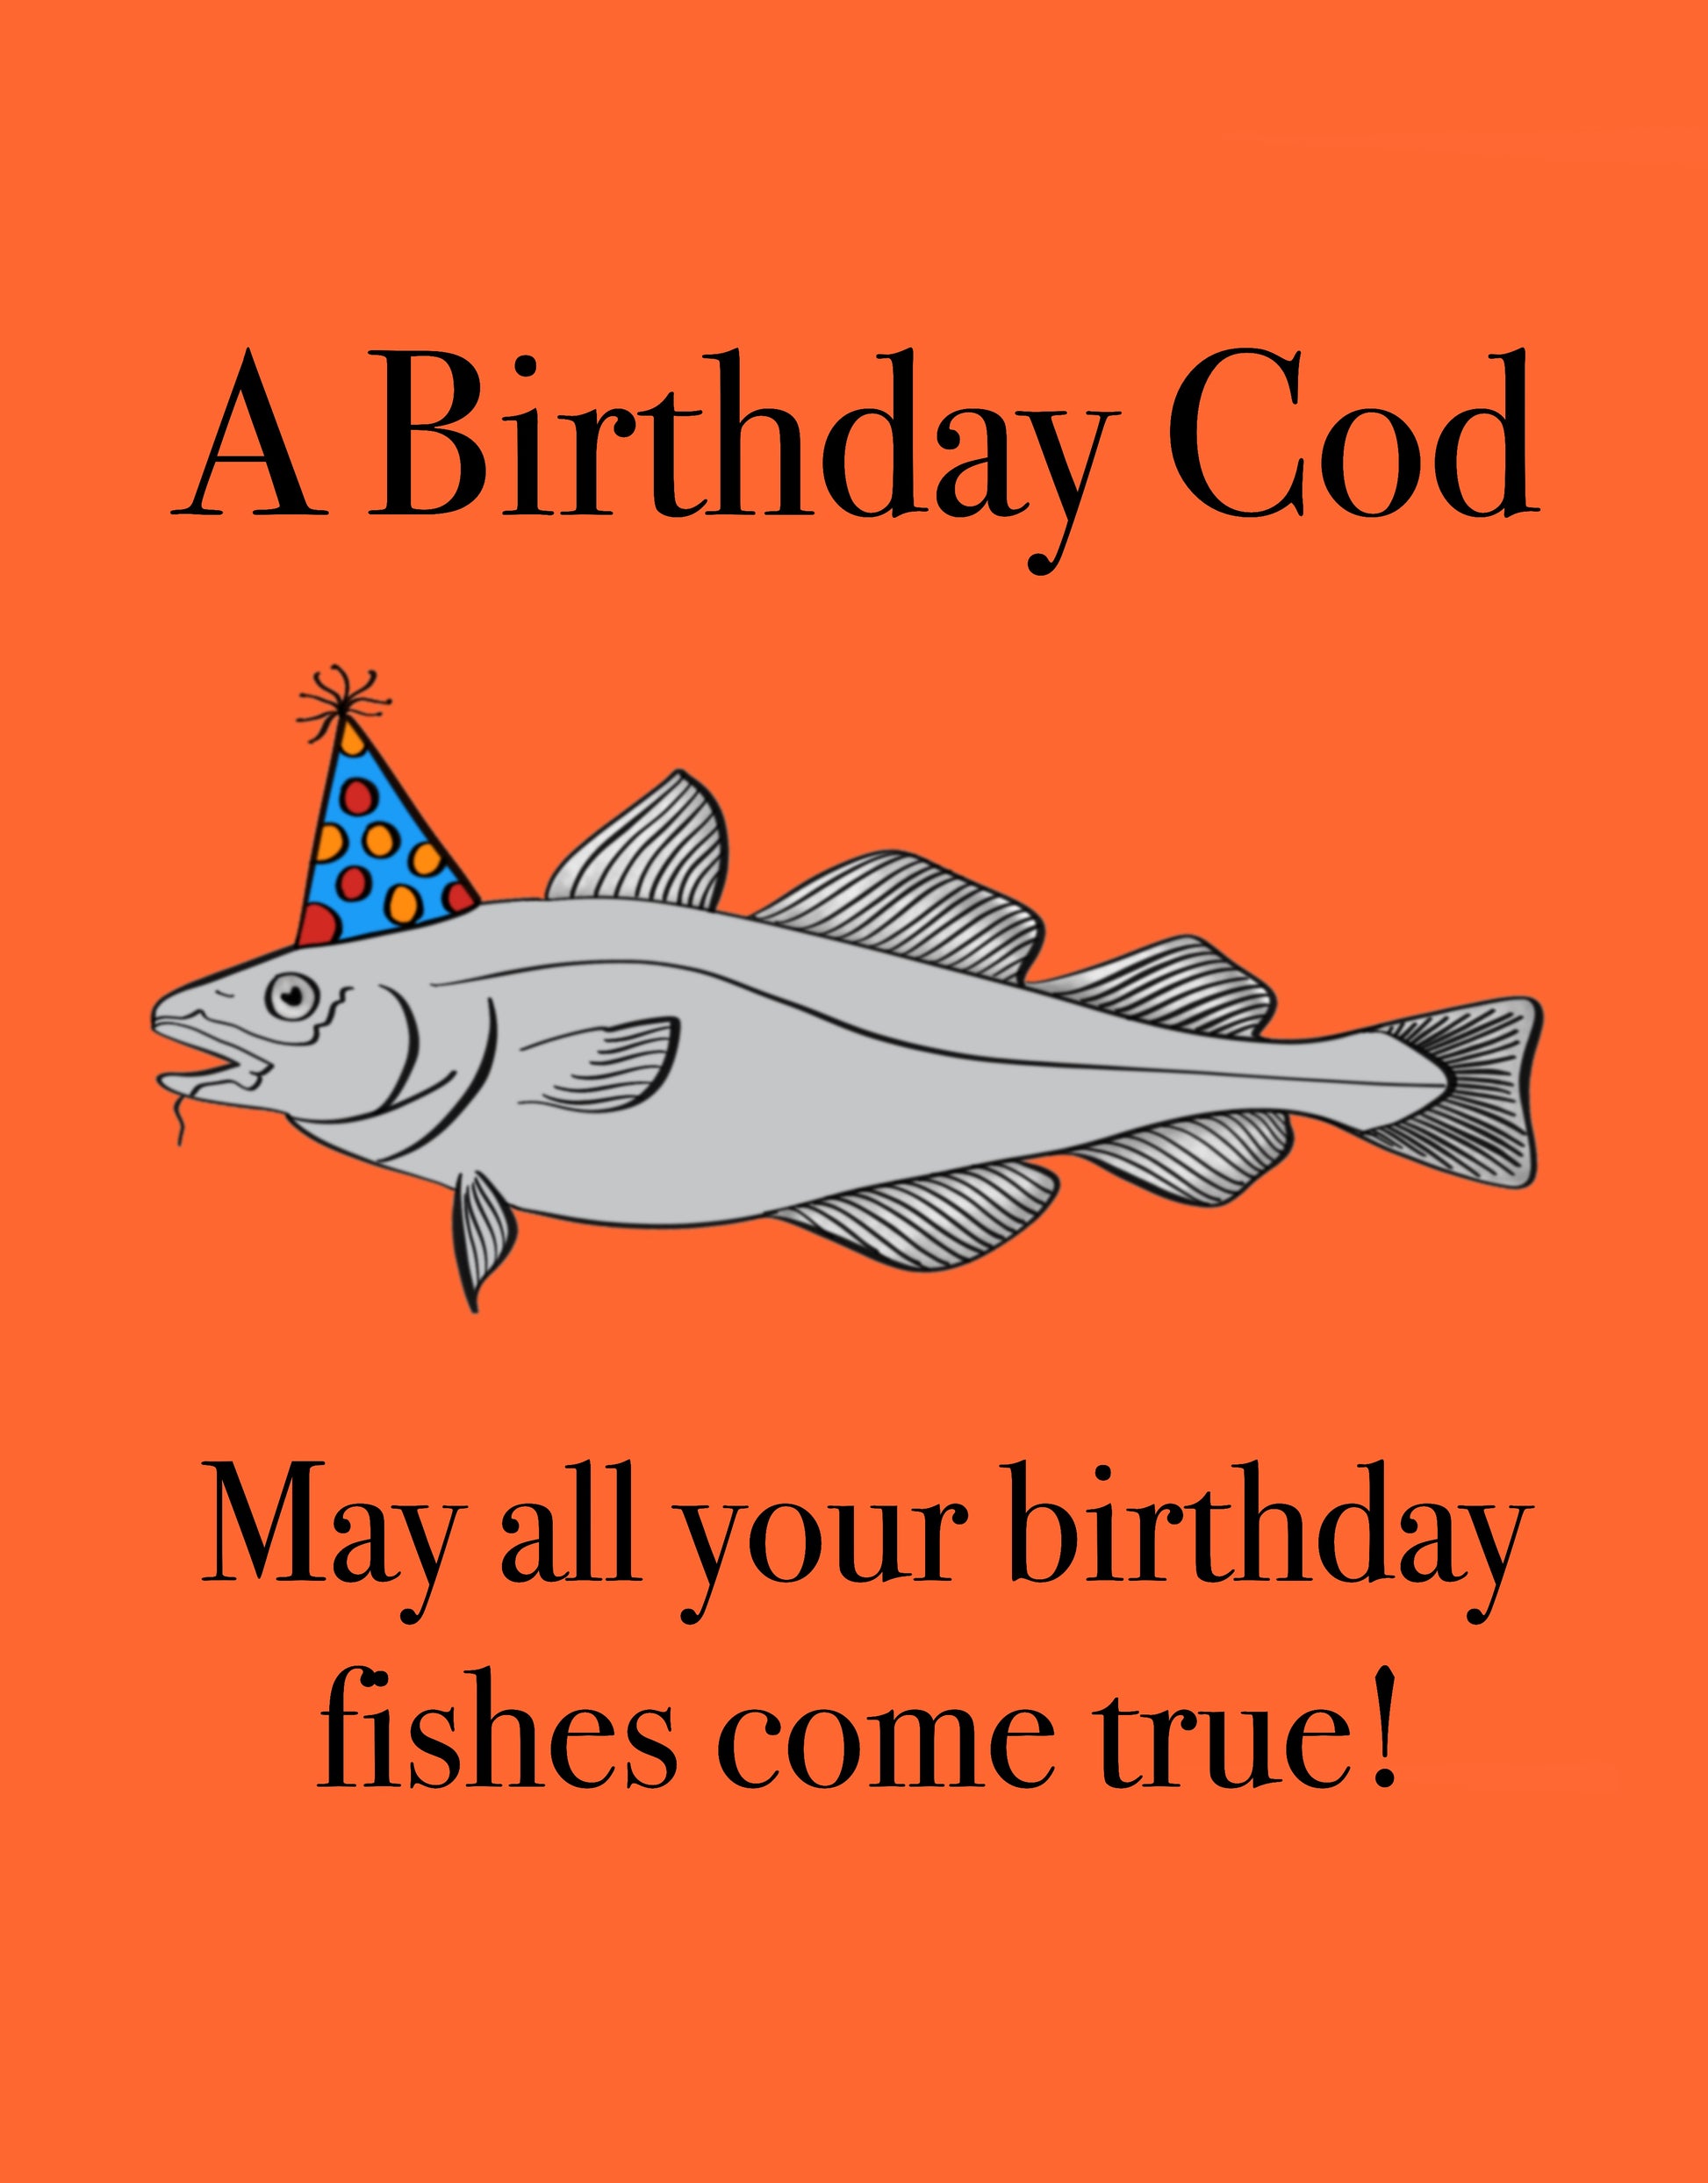 "A Birthday Cod" is one of our best selling greeting cards.  This unique and humorous card features a burnt-orange background with a gray cod fish sporting a polka dotted birthday hat, and is sure to put a smile on your face. All original artwork is created by Jennifer Knight.  NewWingStudio.com